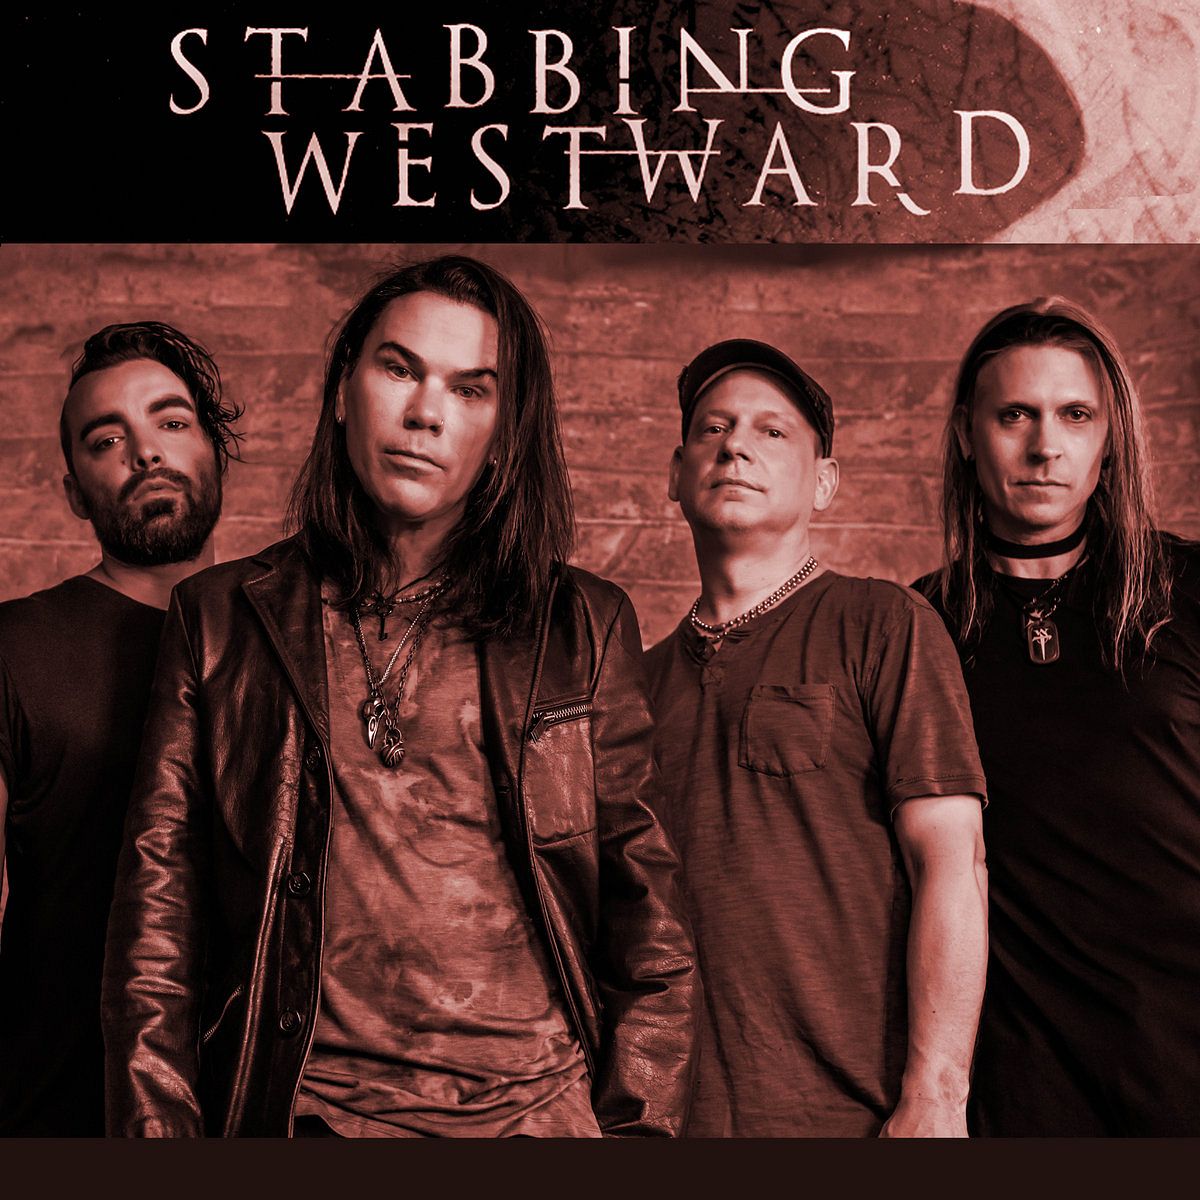 Stabbing Westward (Houston) Tickets at Scout Bar in Houston by Din